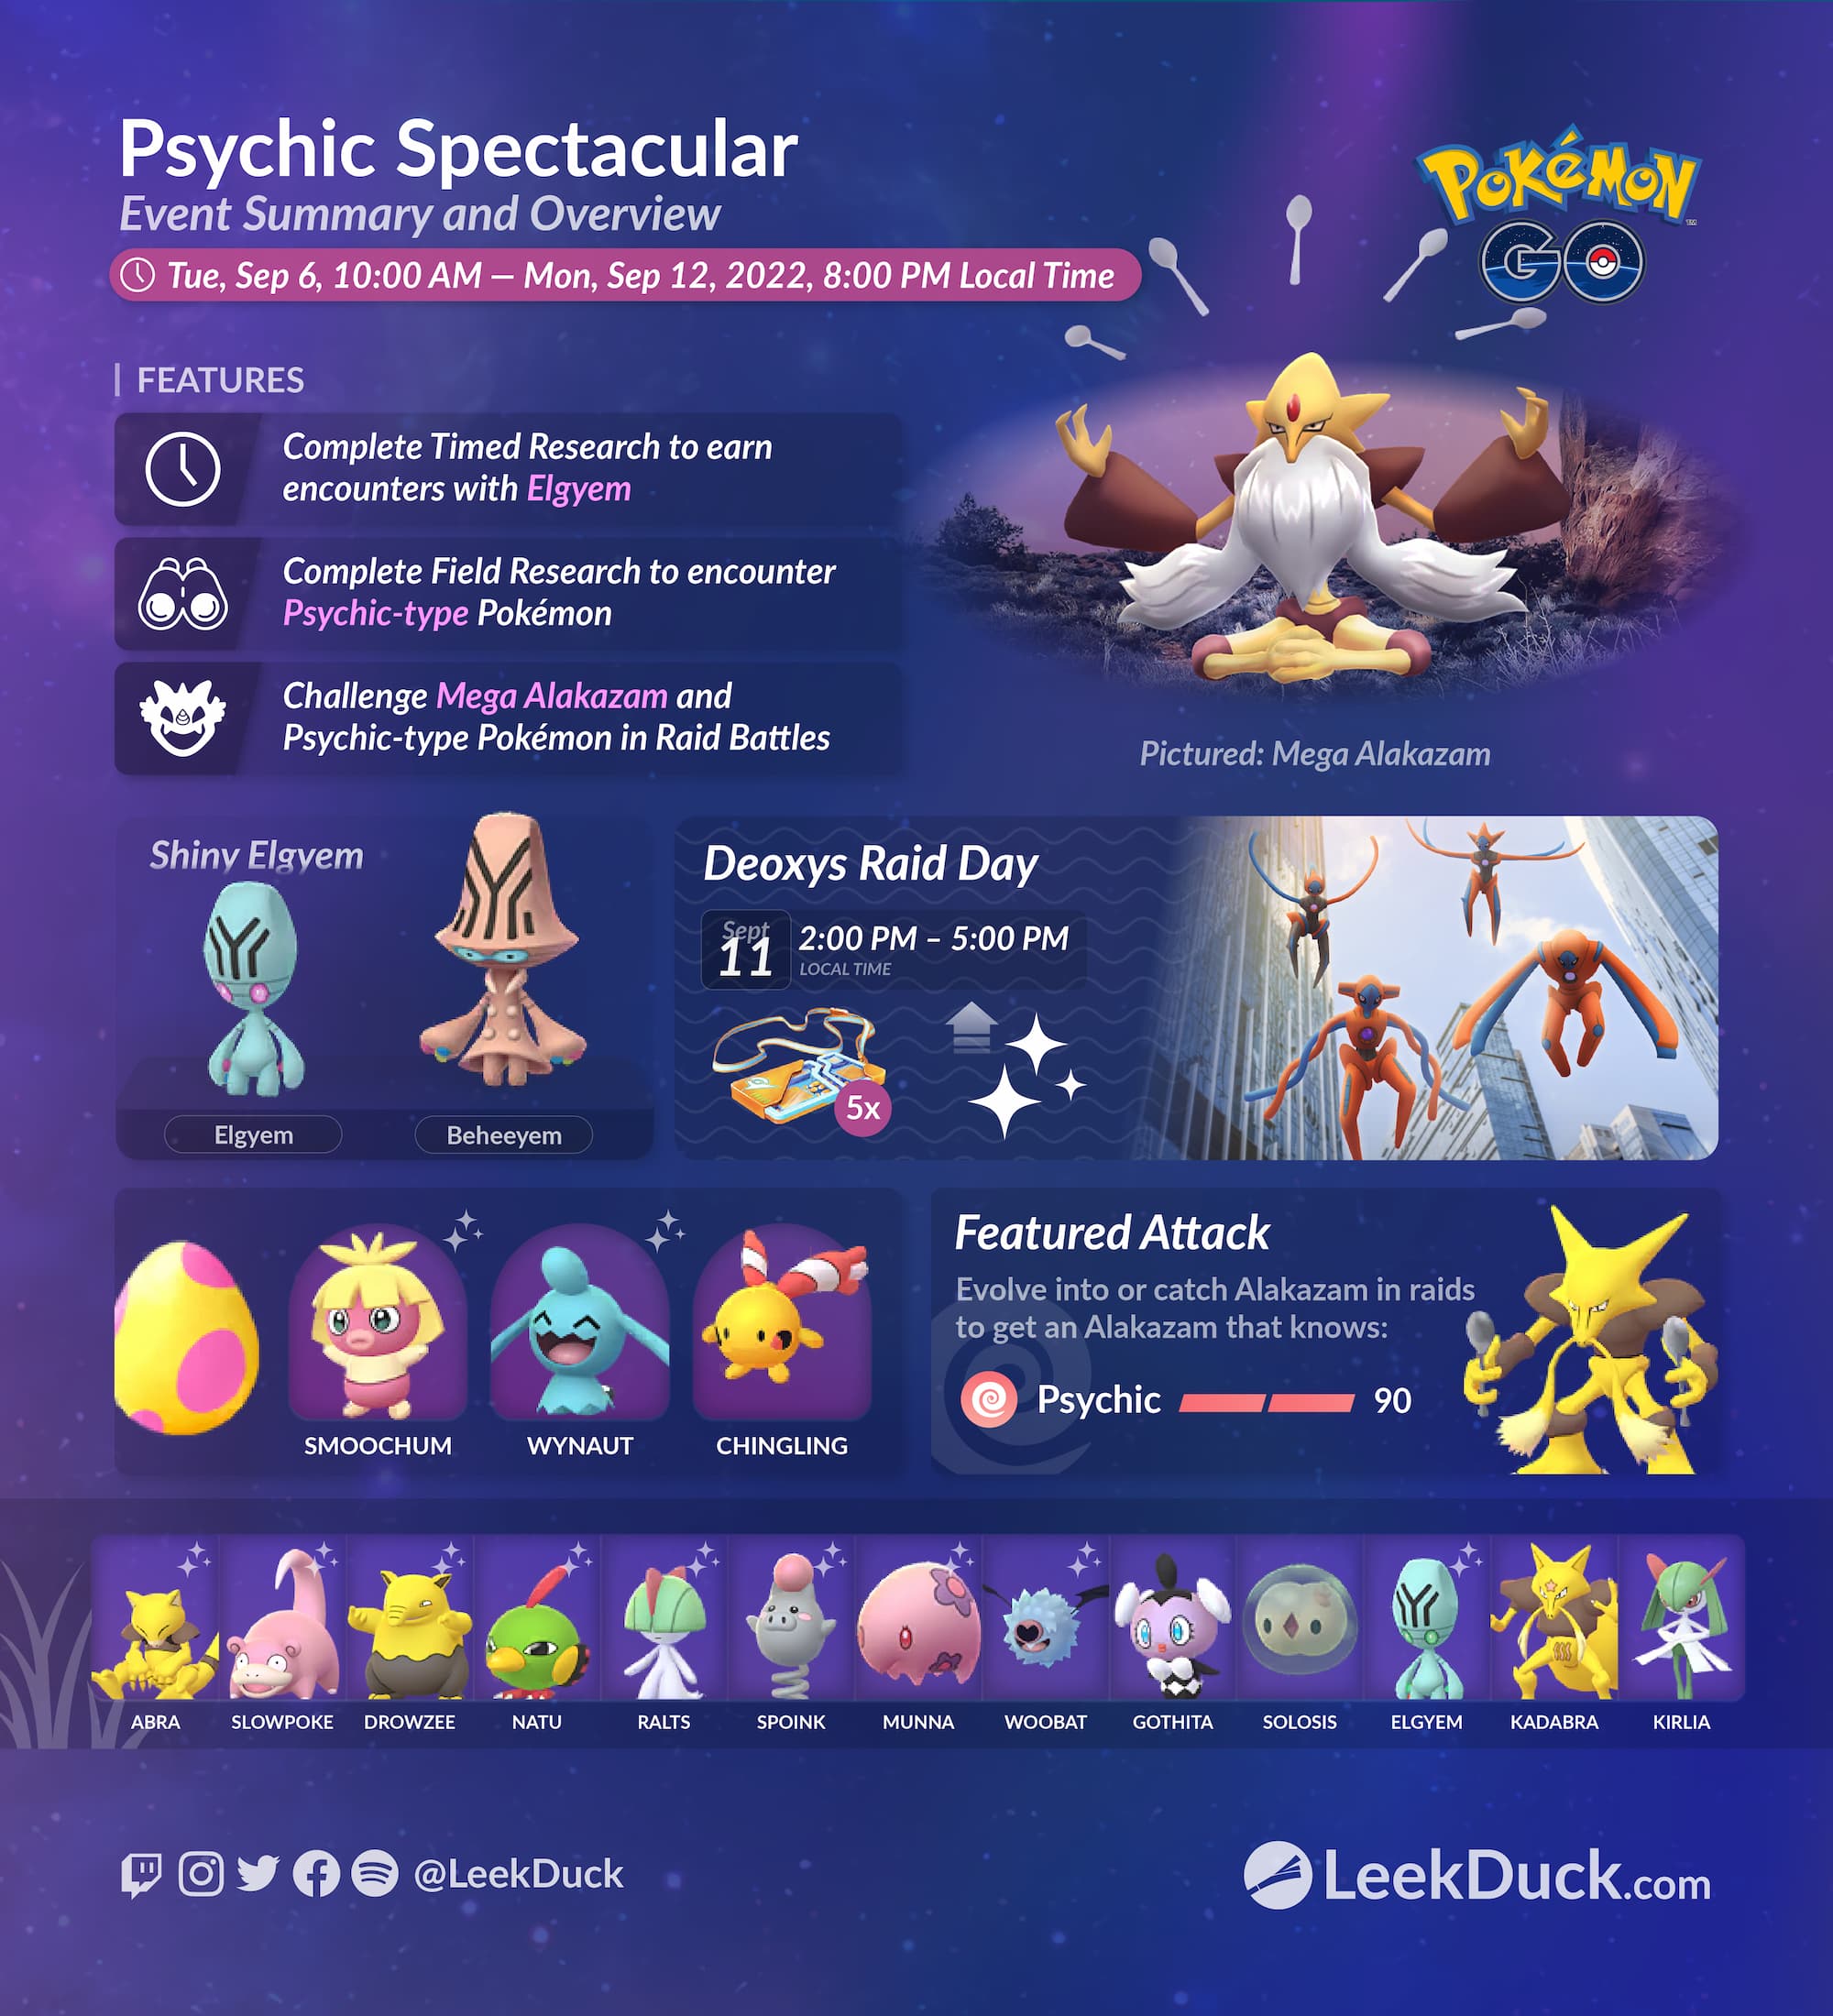 Pokémon GO Unreleased Species In The Daily LITG, 11th January 2022